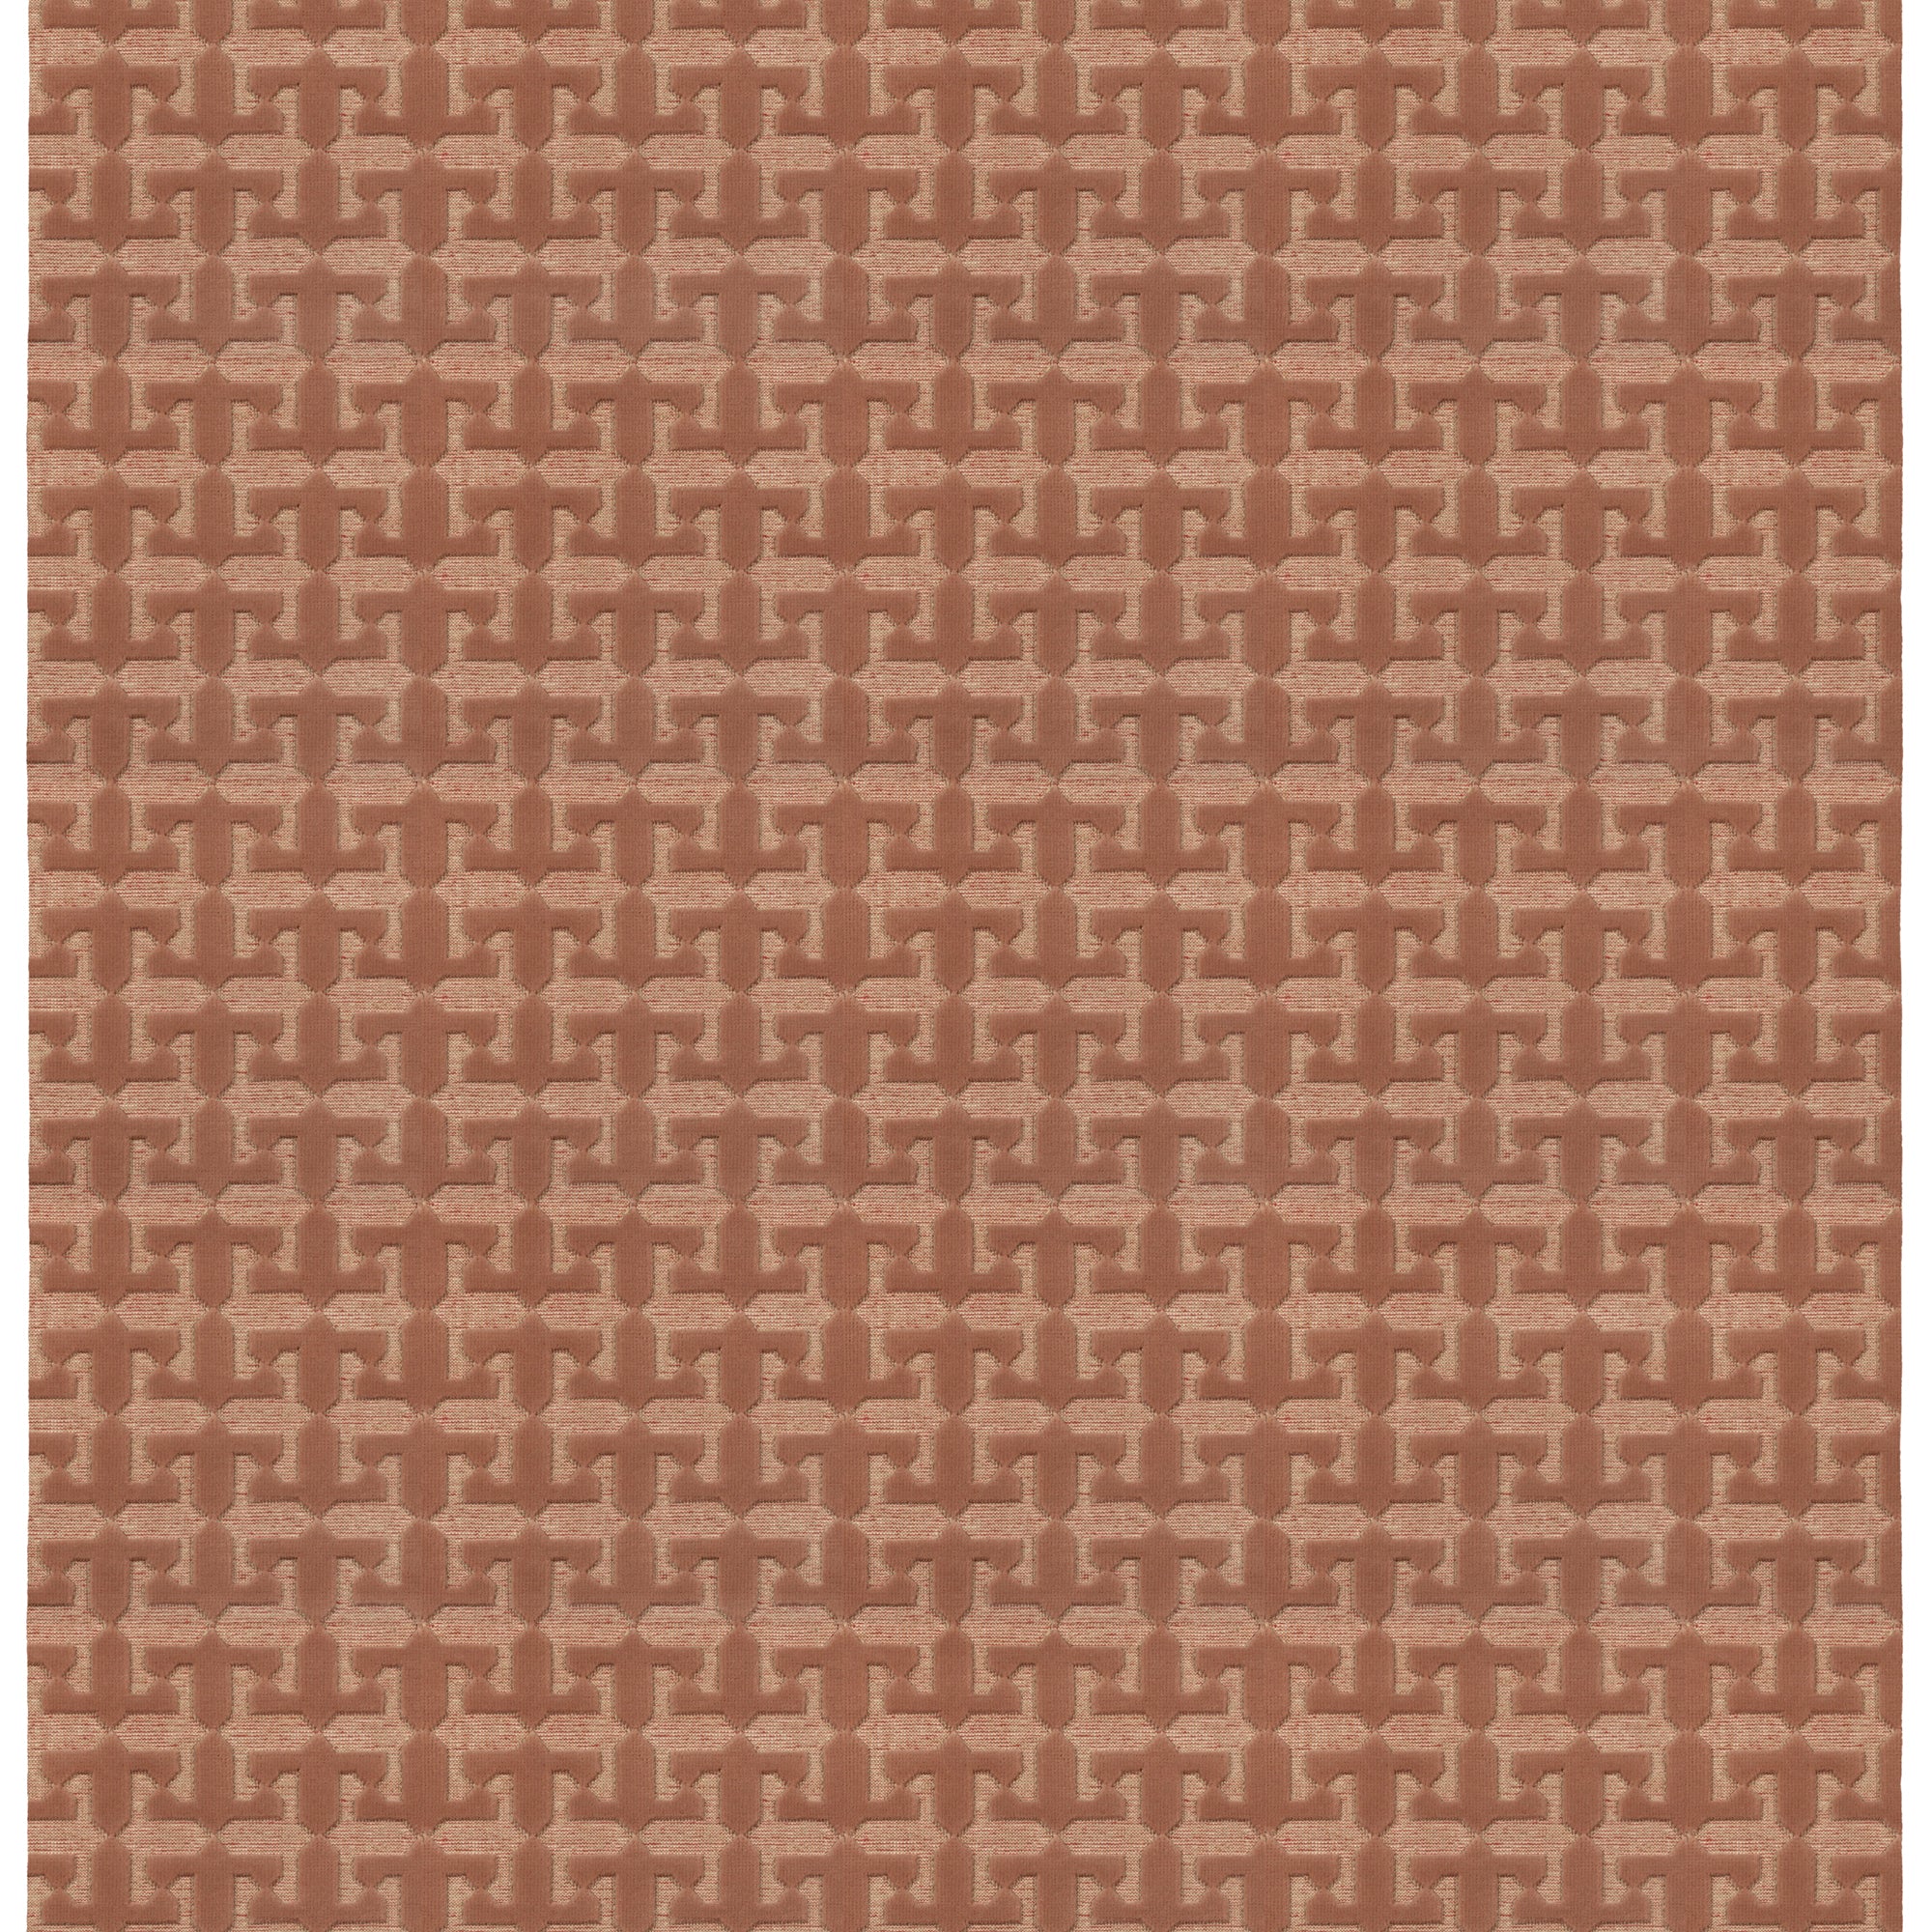 Full size Iseo Rug in Conch, a textural monochromatic abstract geometric pattern in terracotta coral color. 